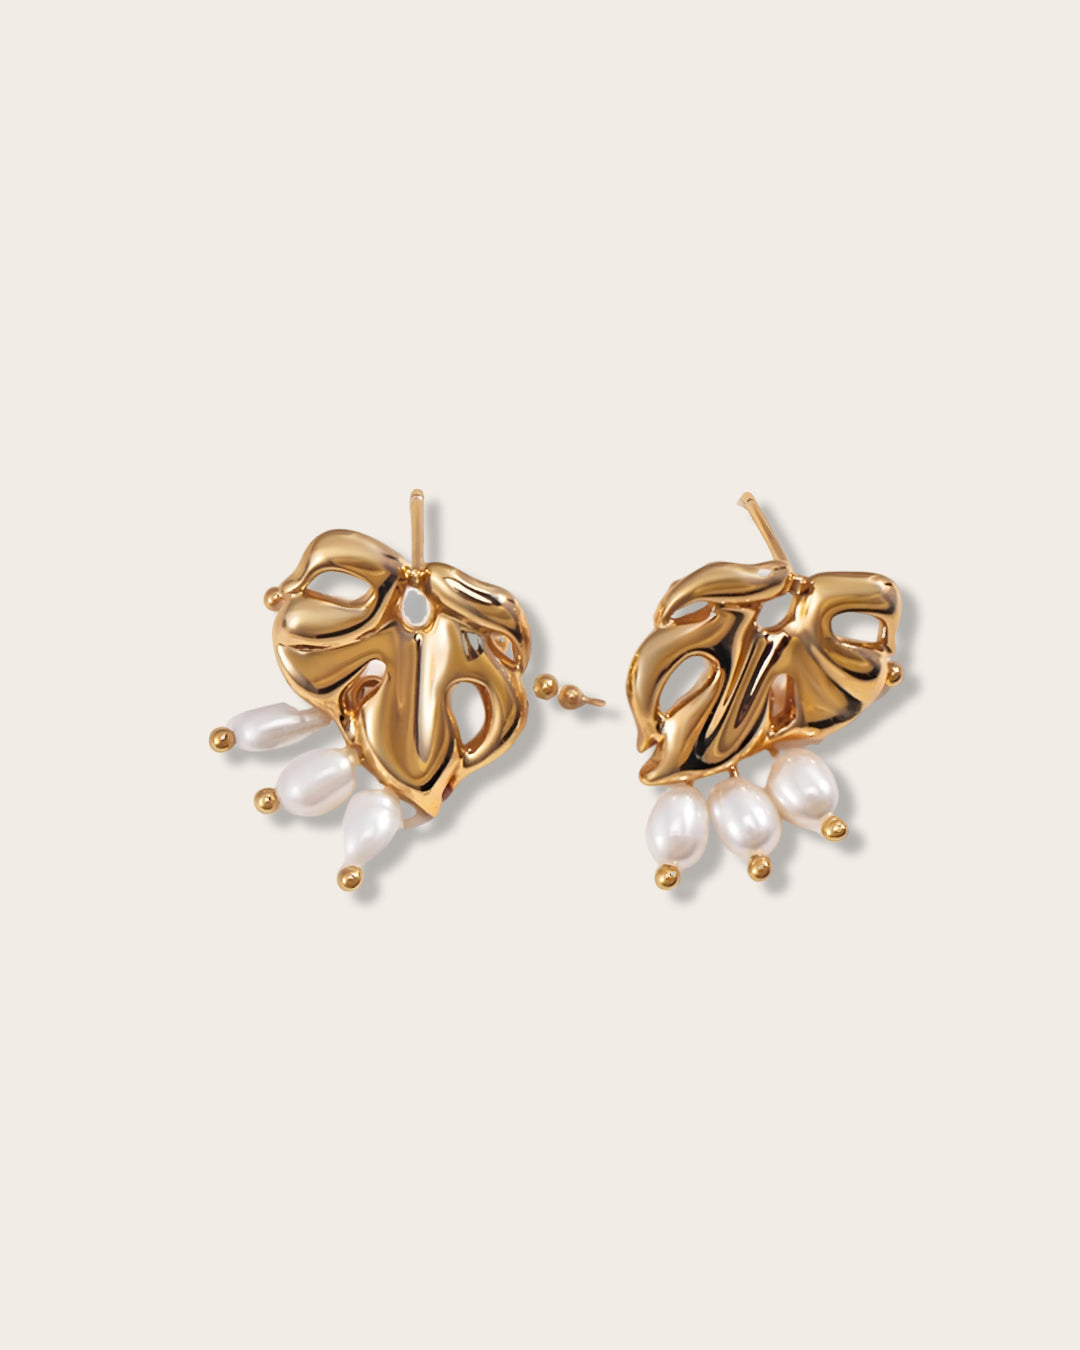 Philodendron Inspired Earrings for Nature Enthusiasts  - S925 Sterling Silver with 18K Gold Vermeil- Pearl Luminance - a subtle shimmer - making these earrings truly captivating